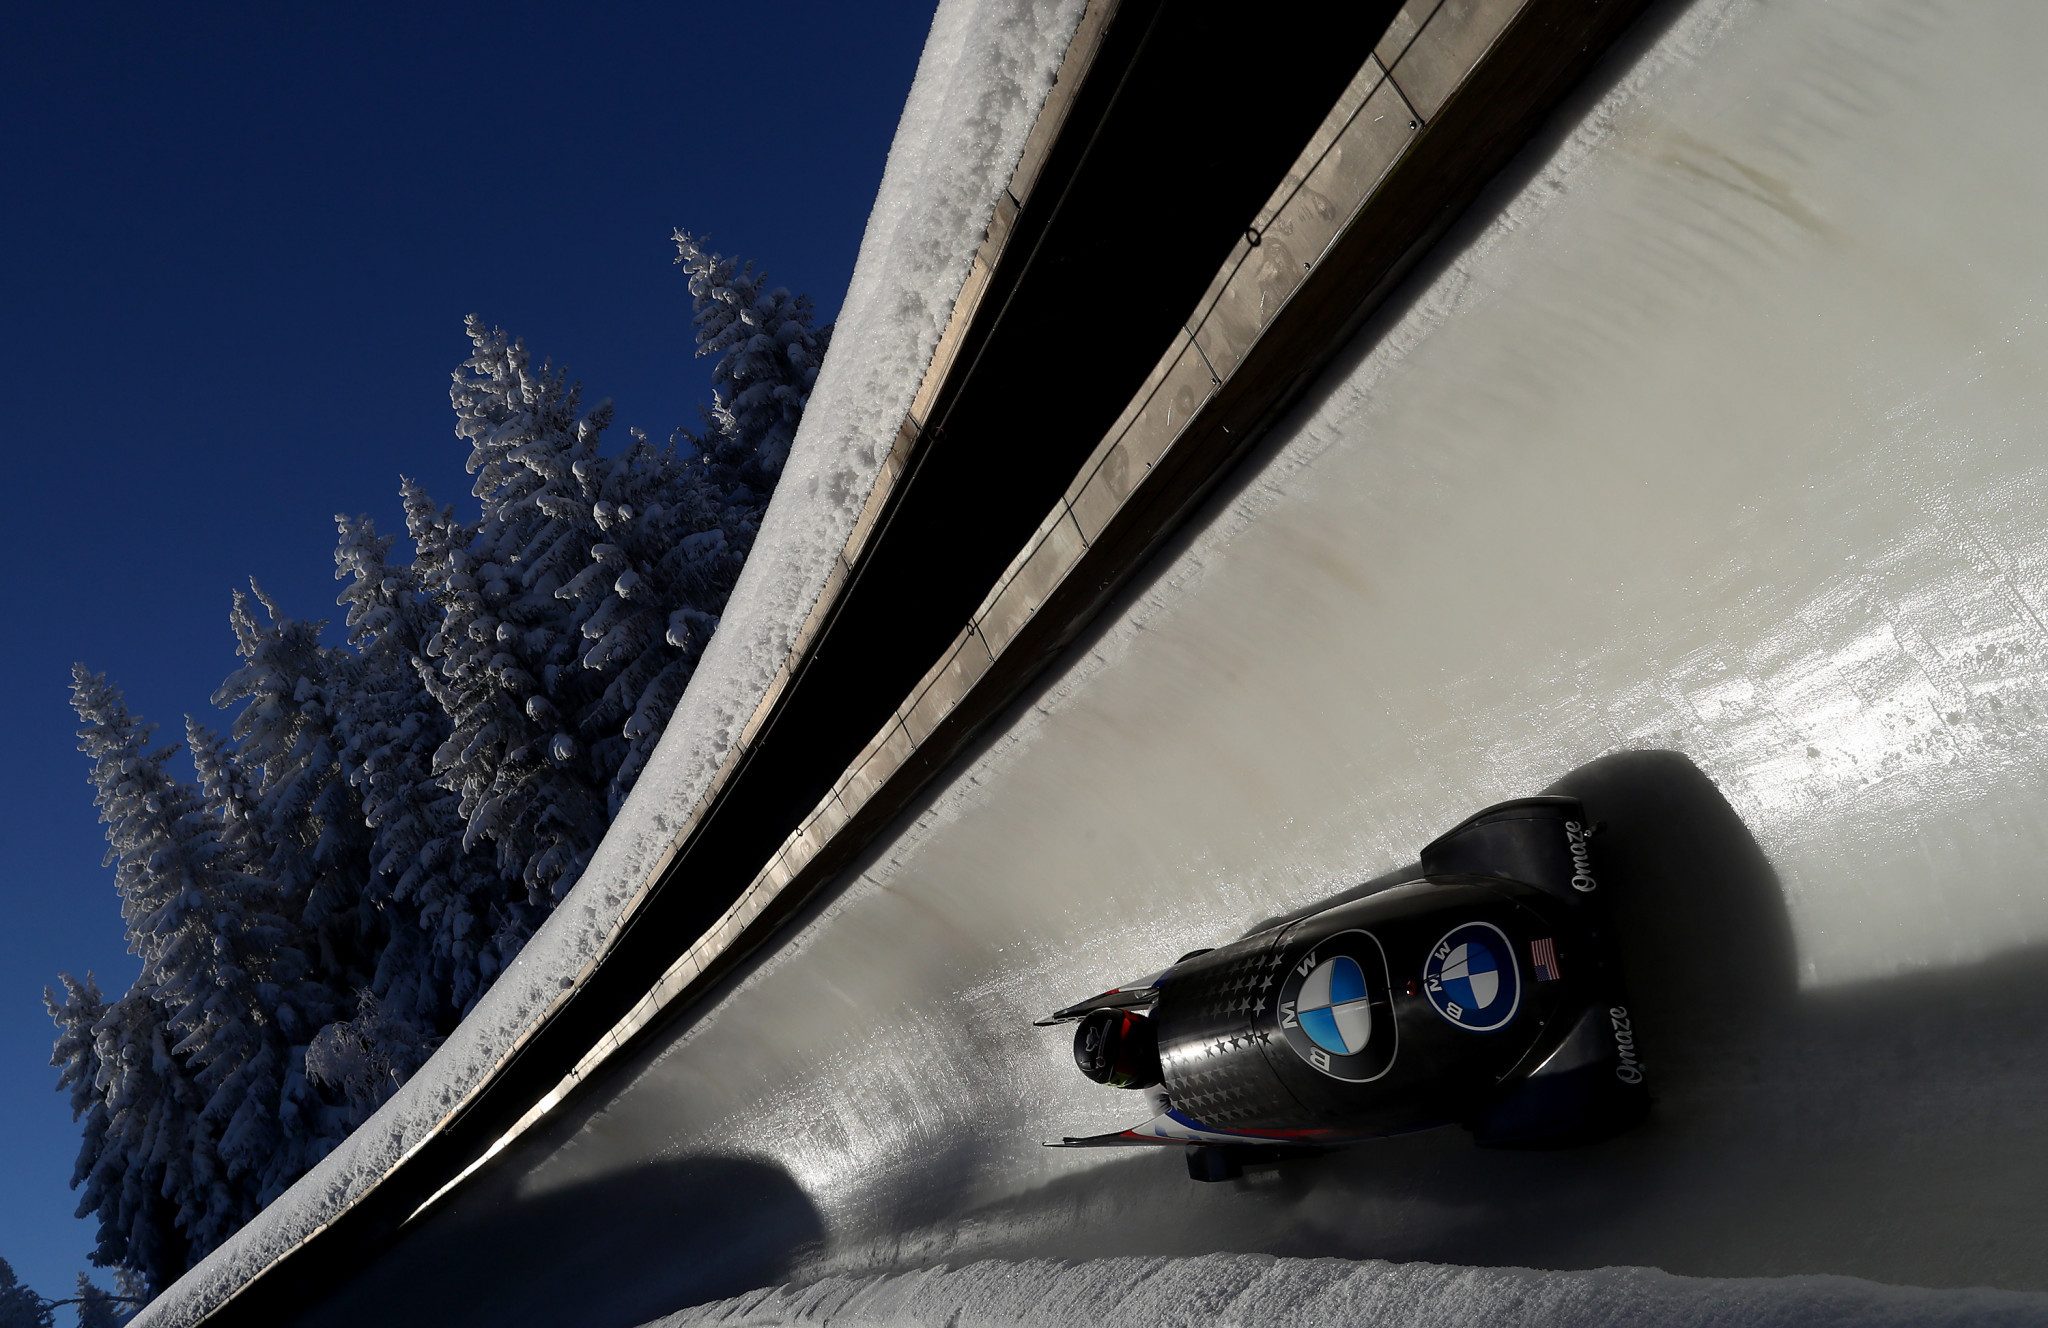 USA Bobsled and Skeleton launch online talent identification initiative with GMTM.com